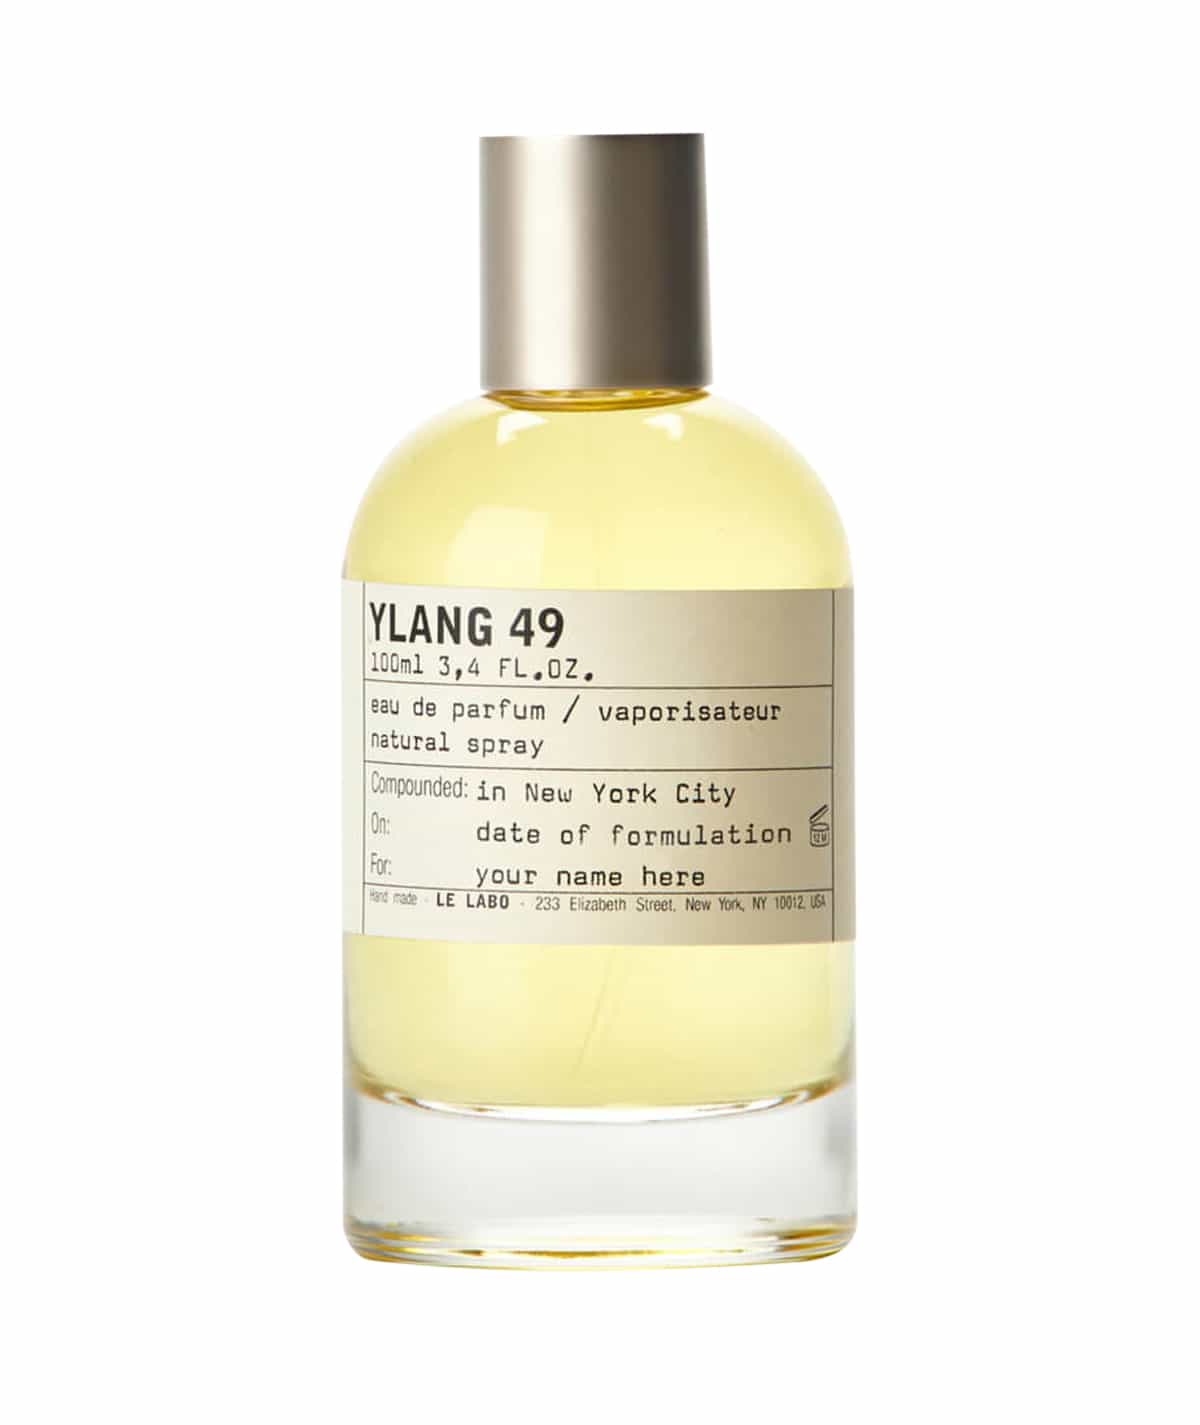 Le Labo’s Best Perfumes for 2023 - FragranceReview.com